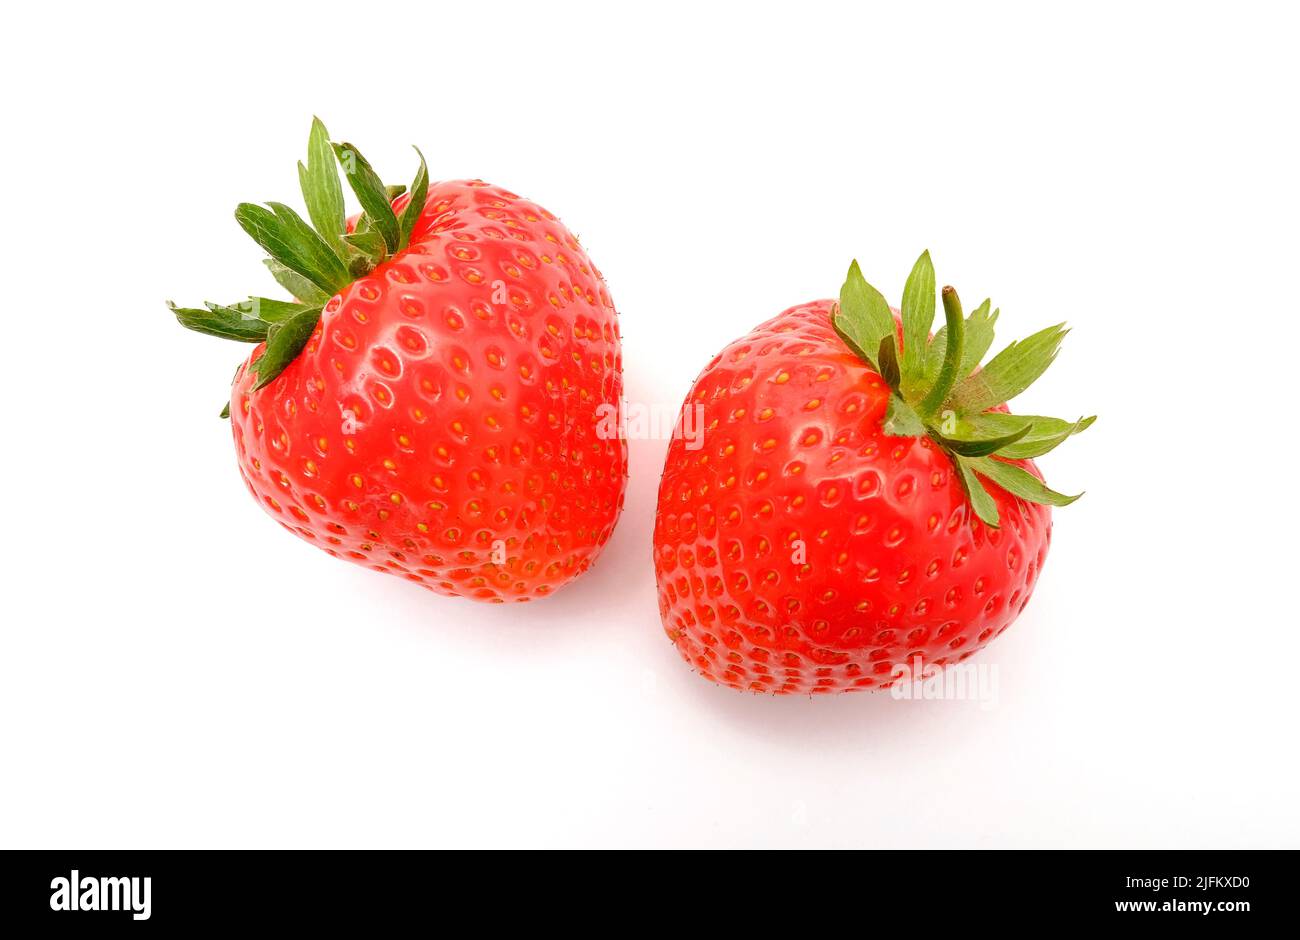 two ripe red english strawberries on white background Stock Photo